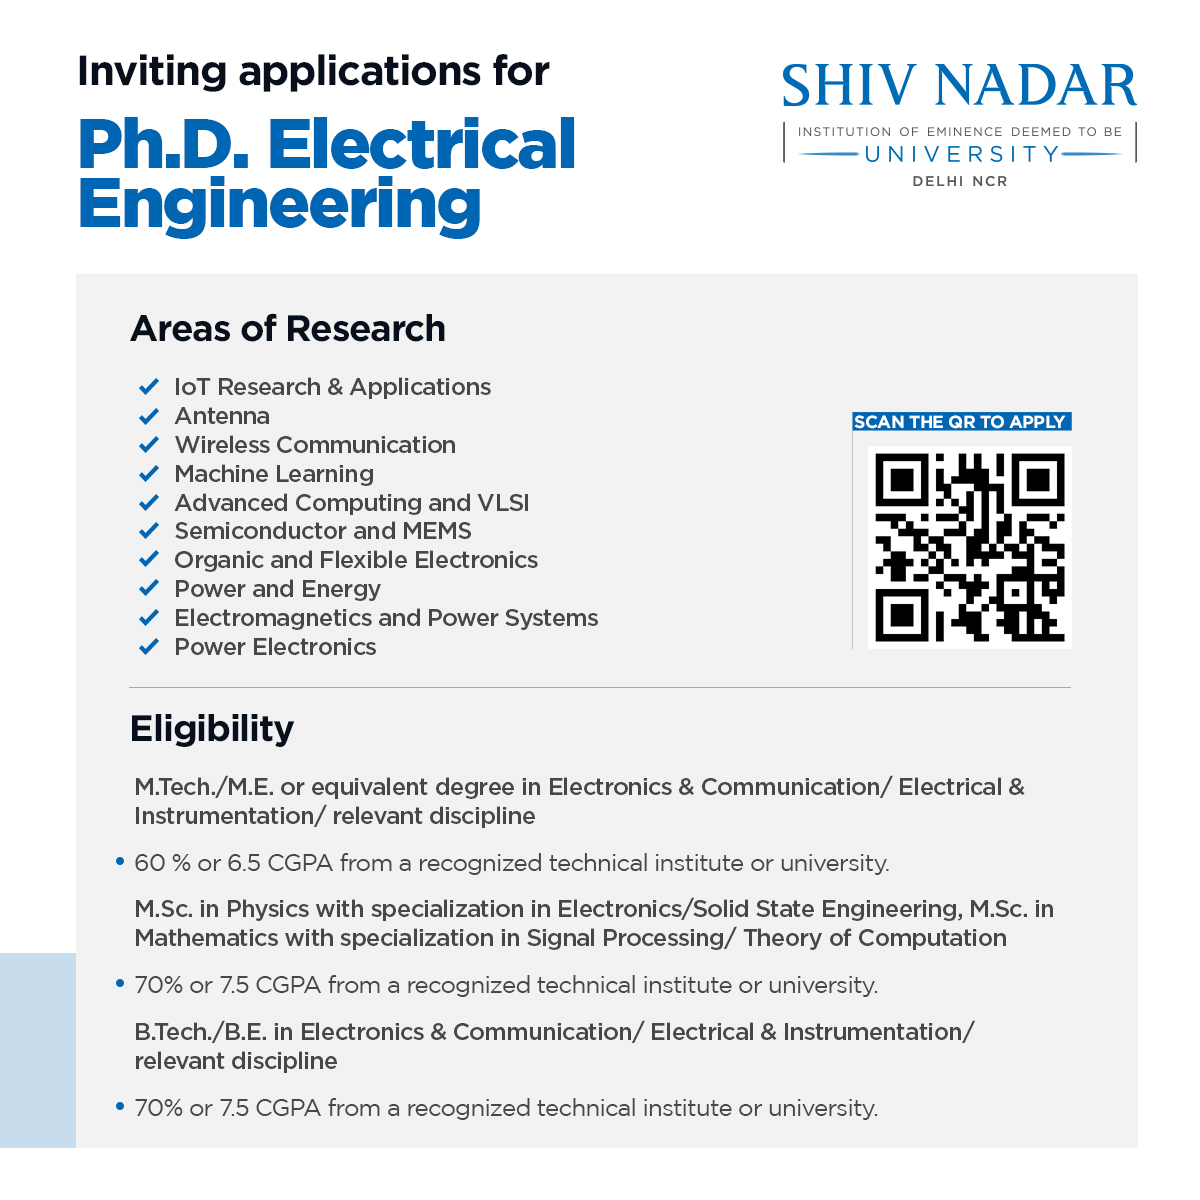 Applications are now open for the Ph.D. in Electrical Engineering program at Shiv Nadar Institution of Eminence for the Monsoon 2023 session! 
Application deadline 15 July 2023. 
Click the link below: bit.ly/3nOSrkk

#PhD #Program #ElectricalEngineering #Research…